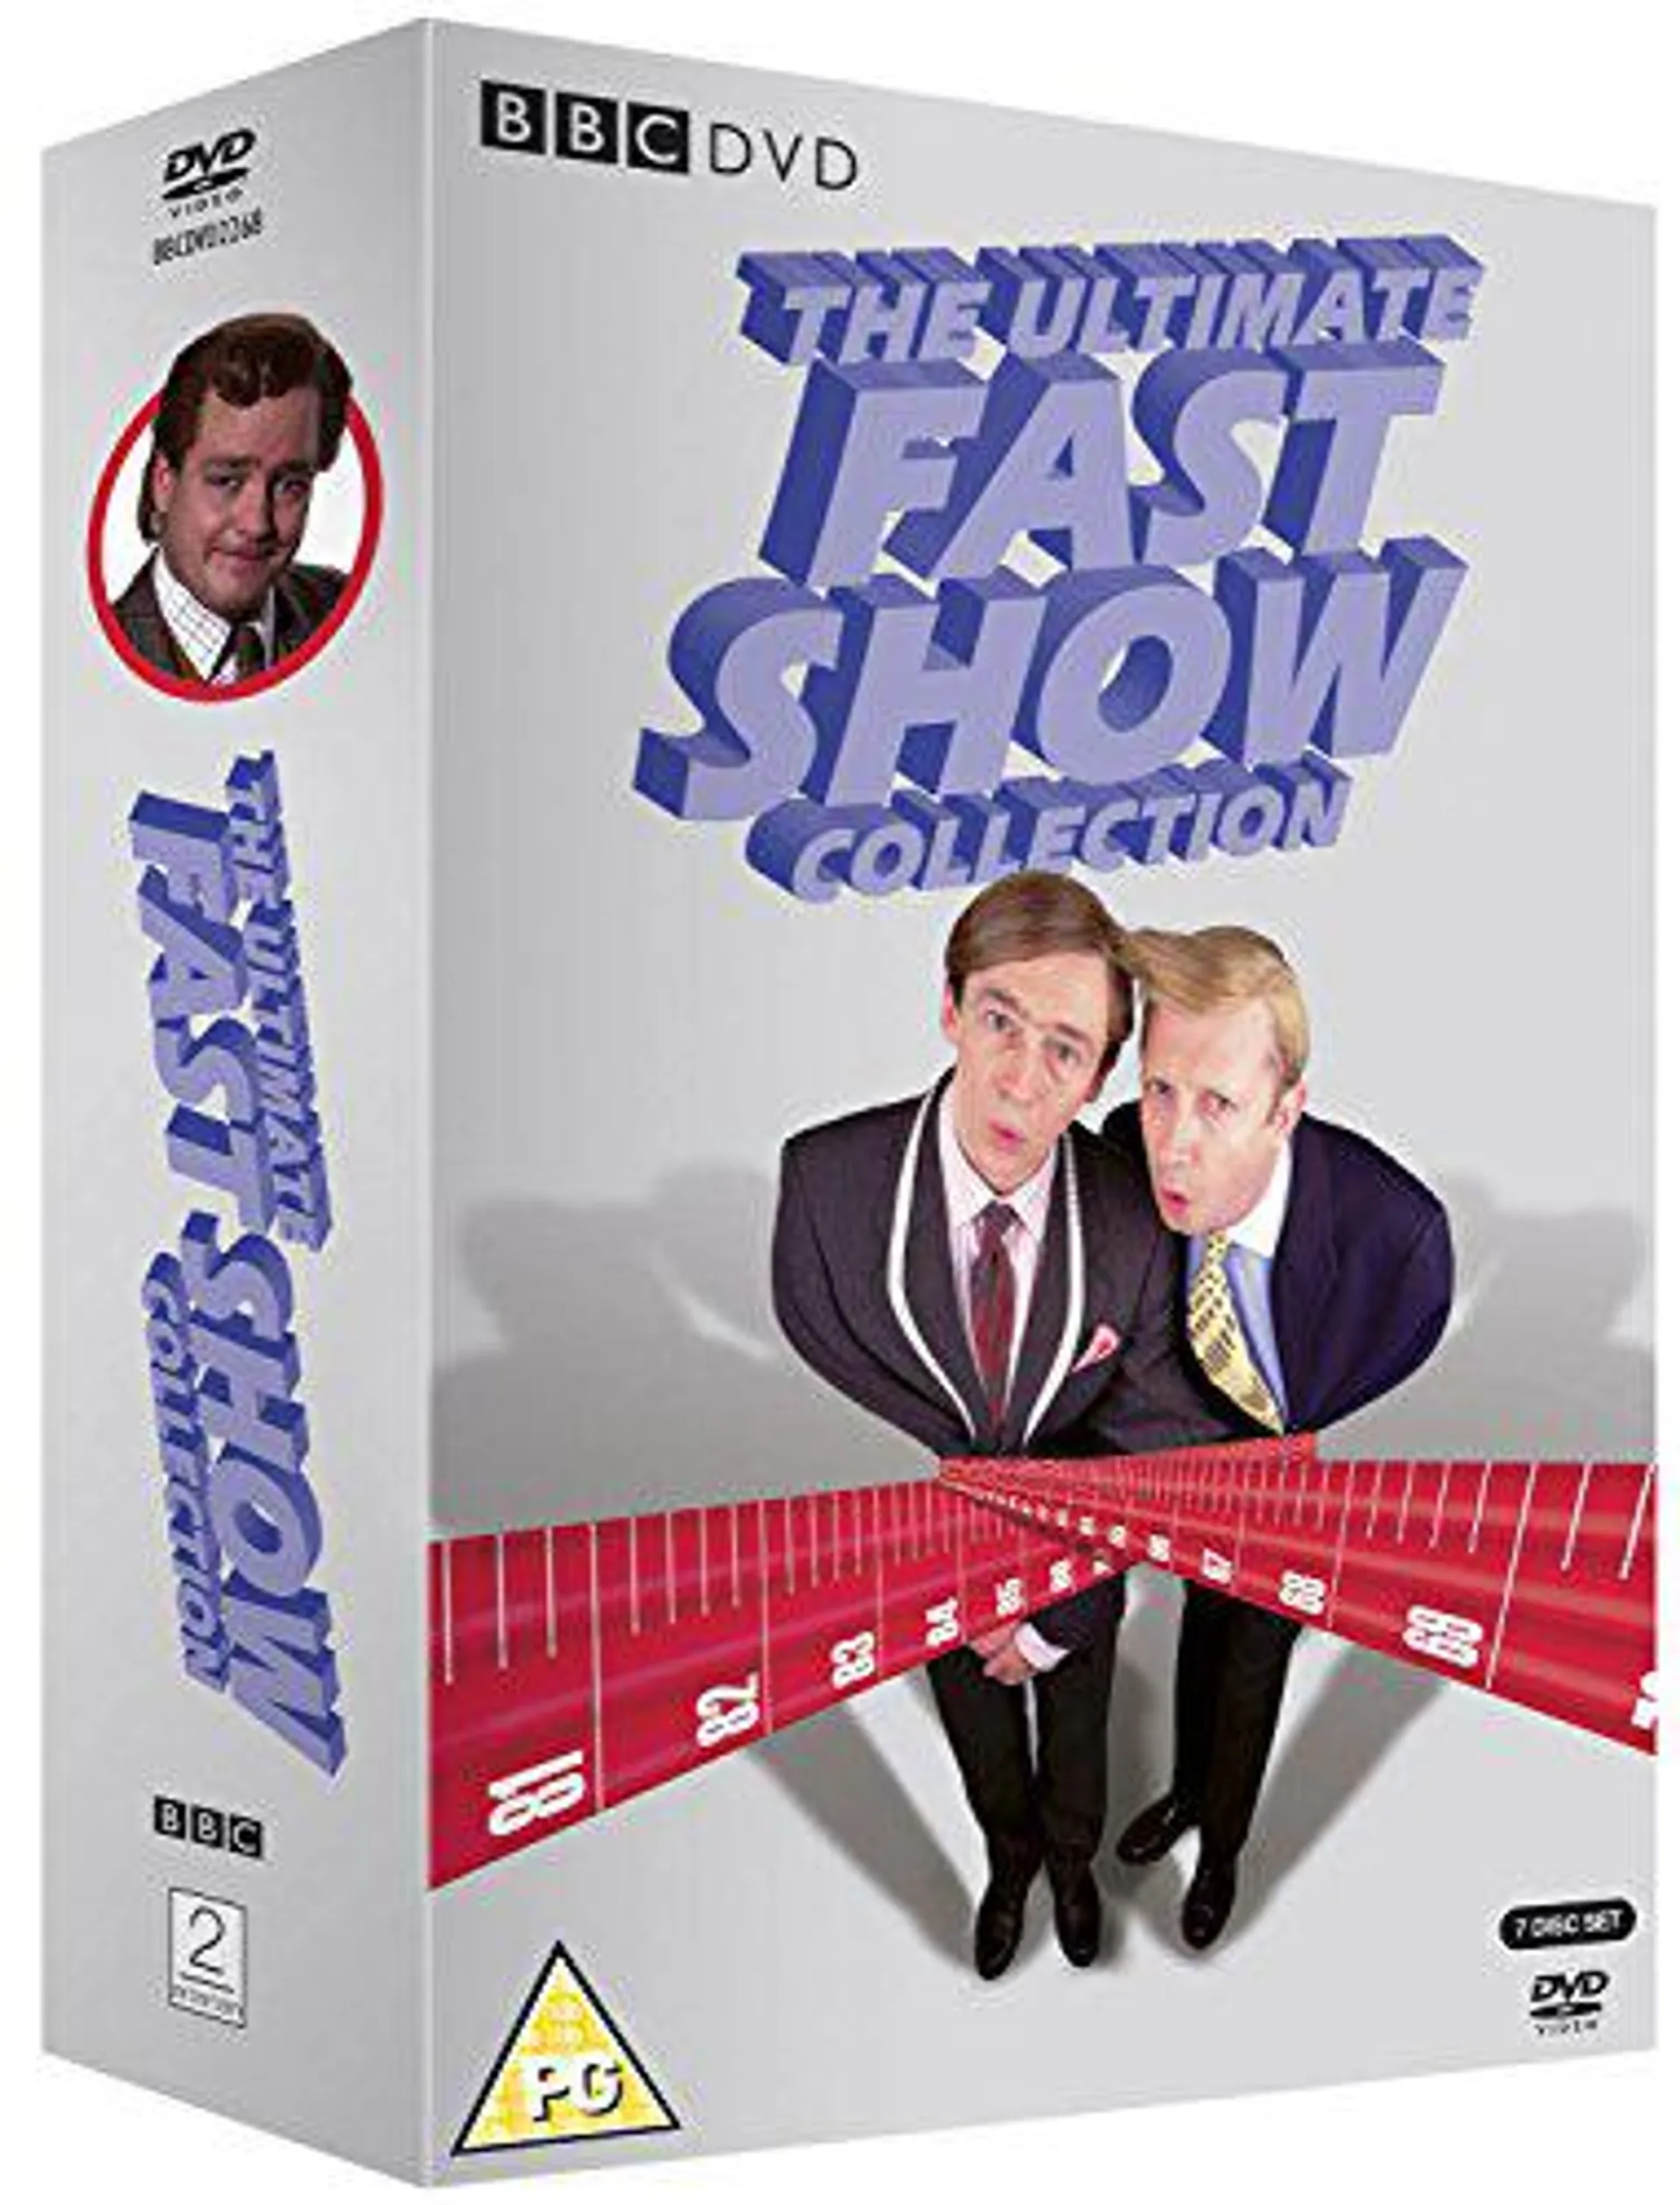 The Fast Show : Ultimate Collection (7 Disc BBC Box Set)